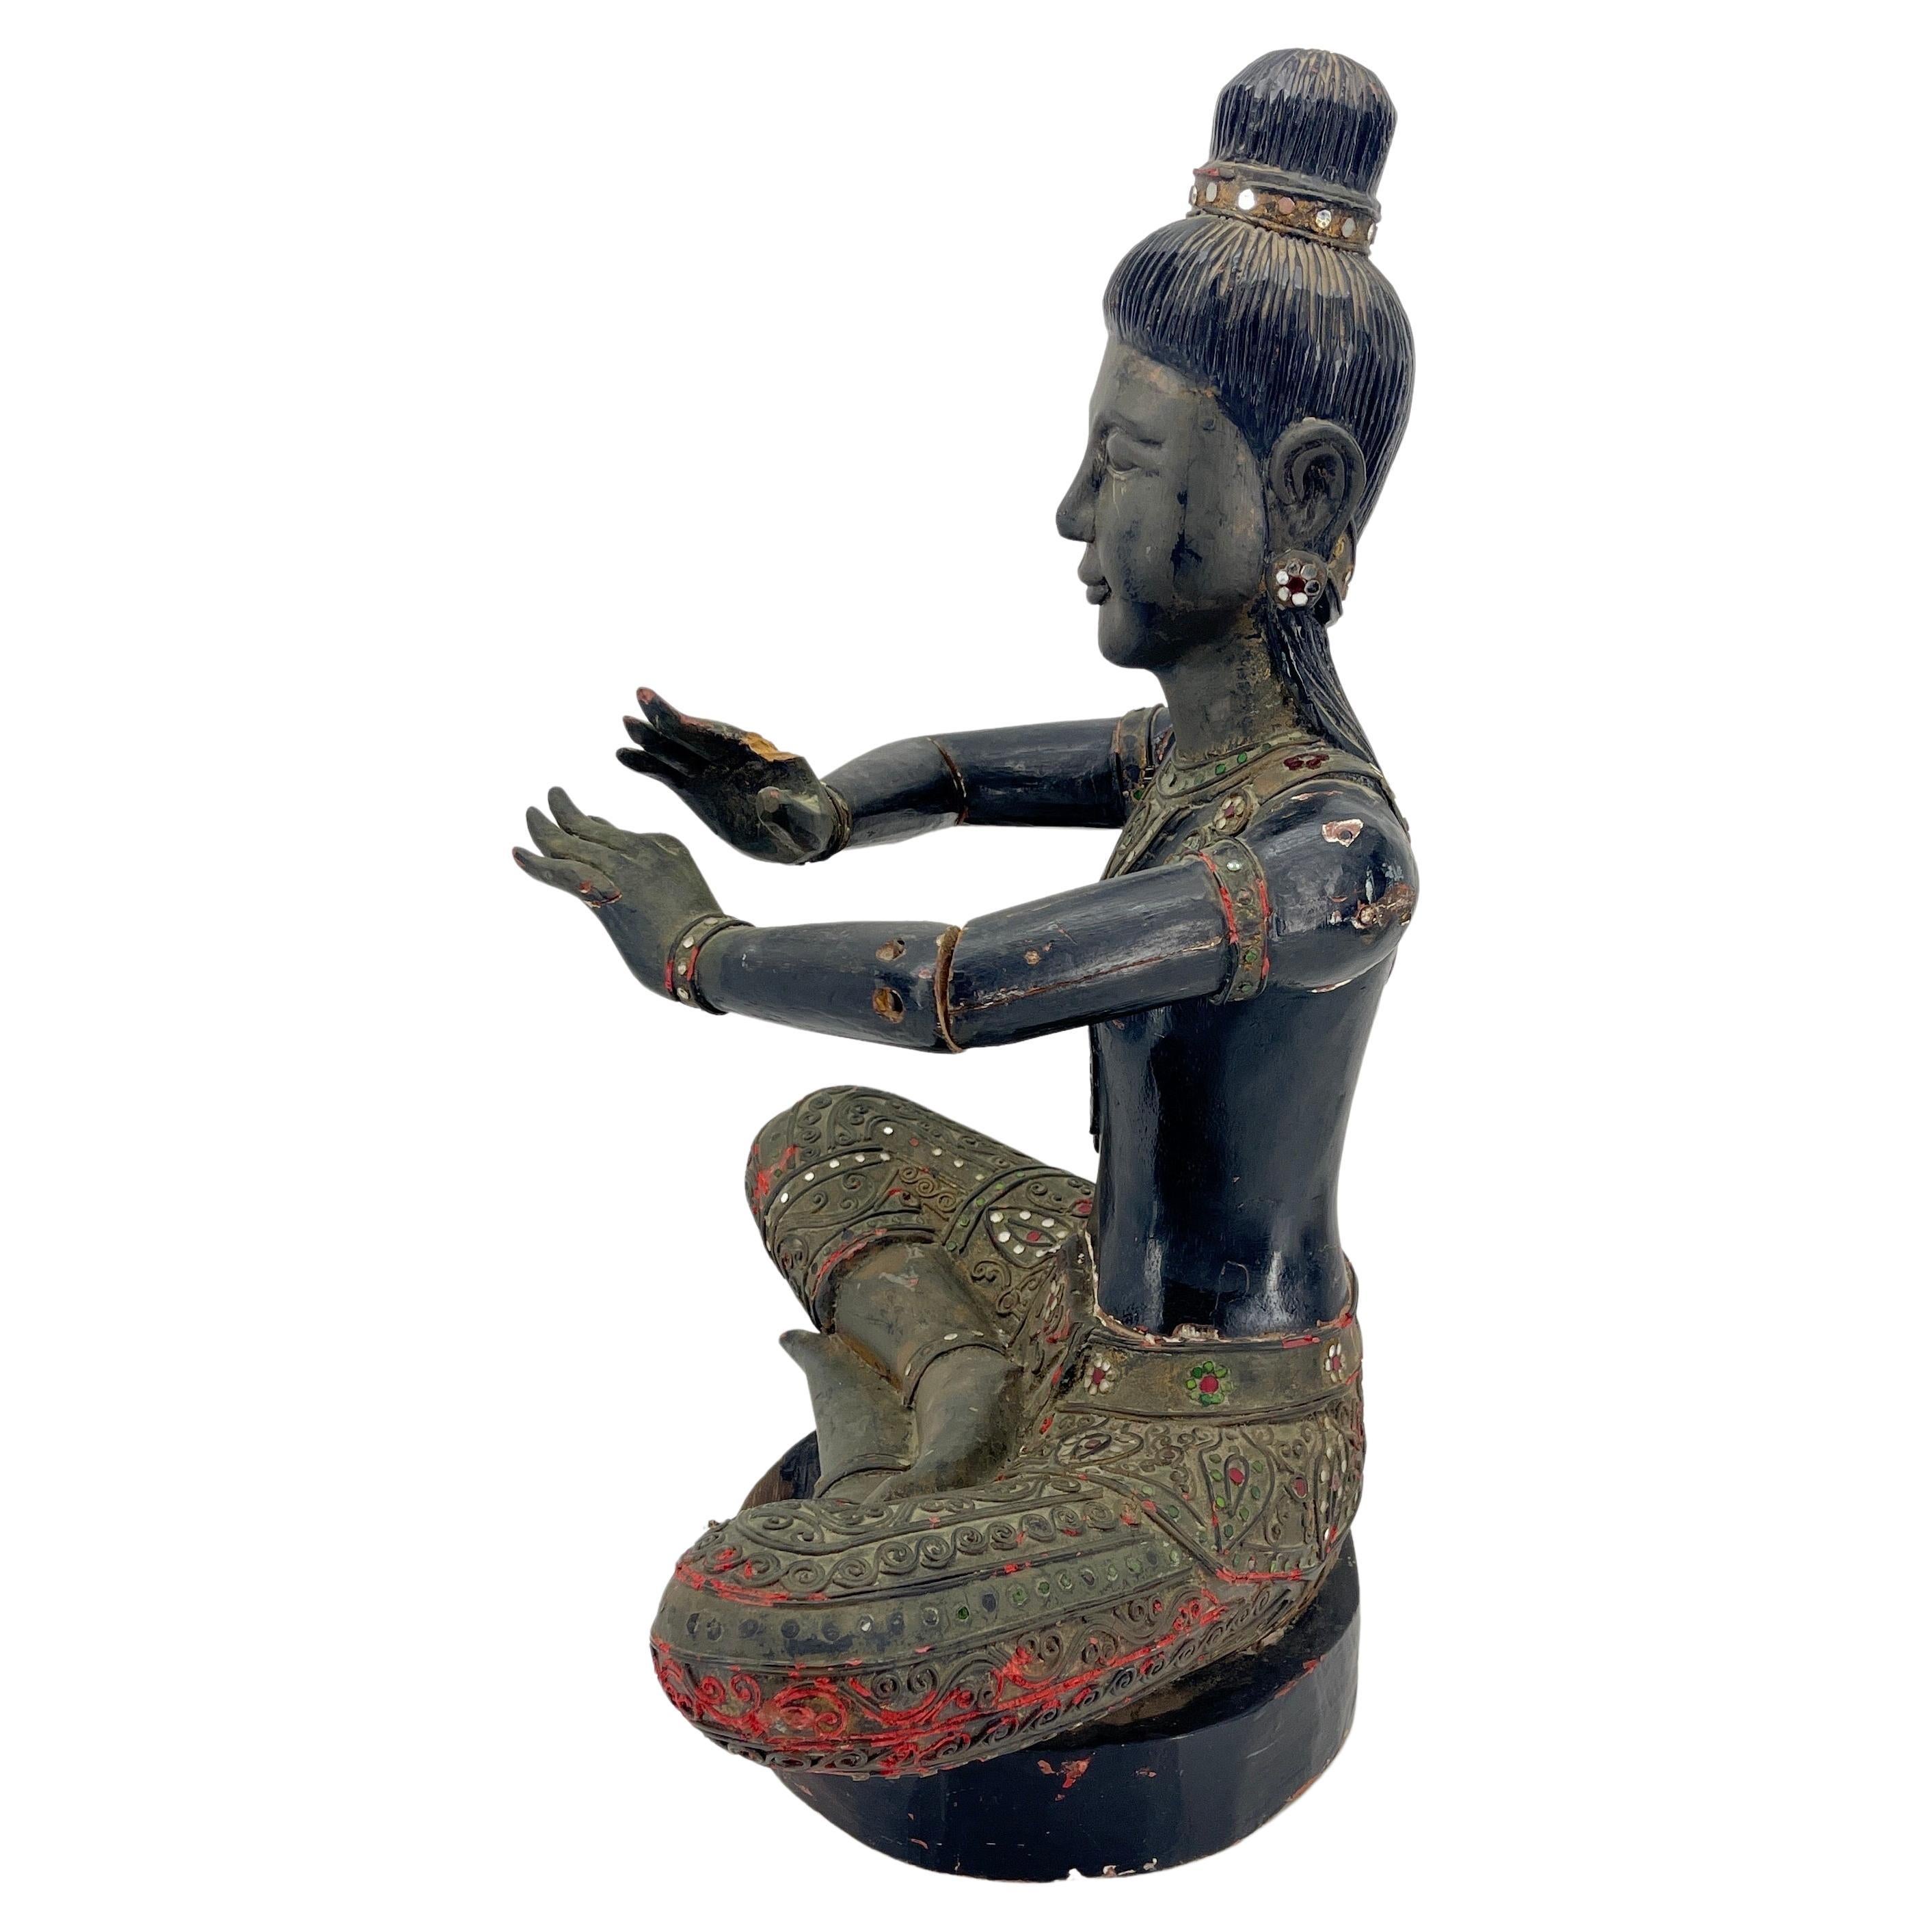 Large Cambodian Black Painted Sitting Buddha Sculpture, circa 1920s For Sale 2